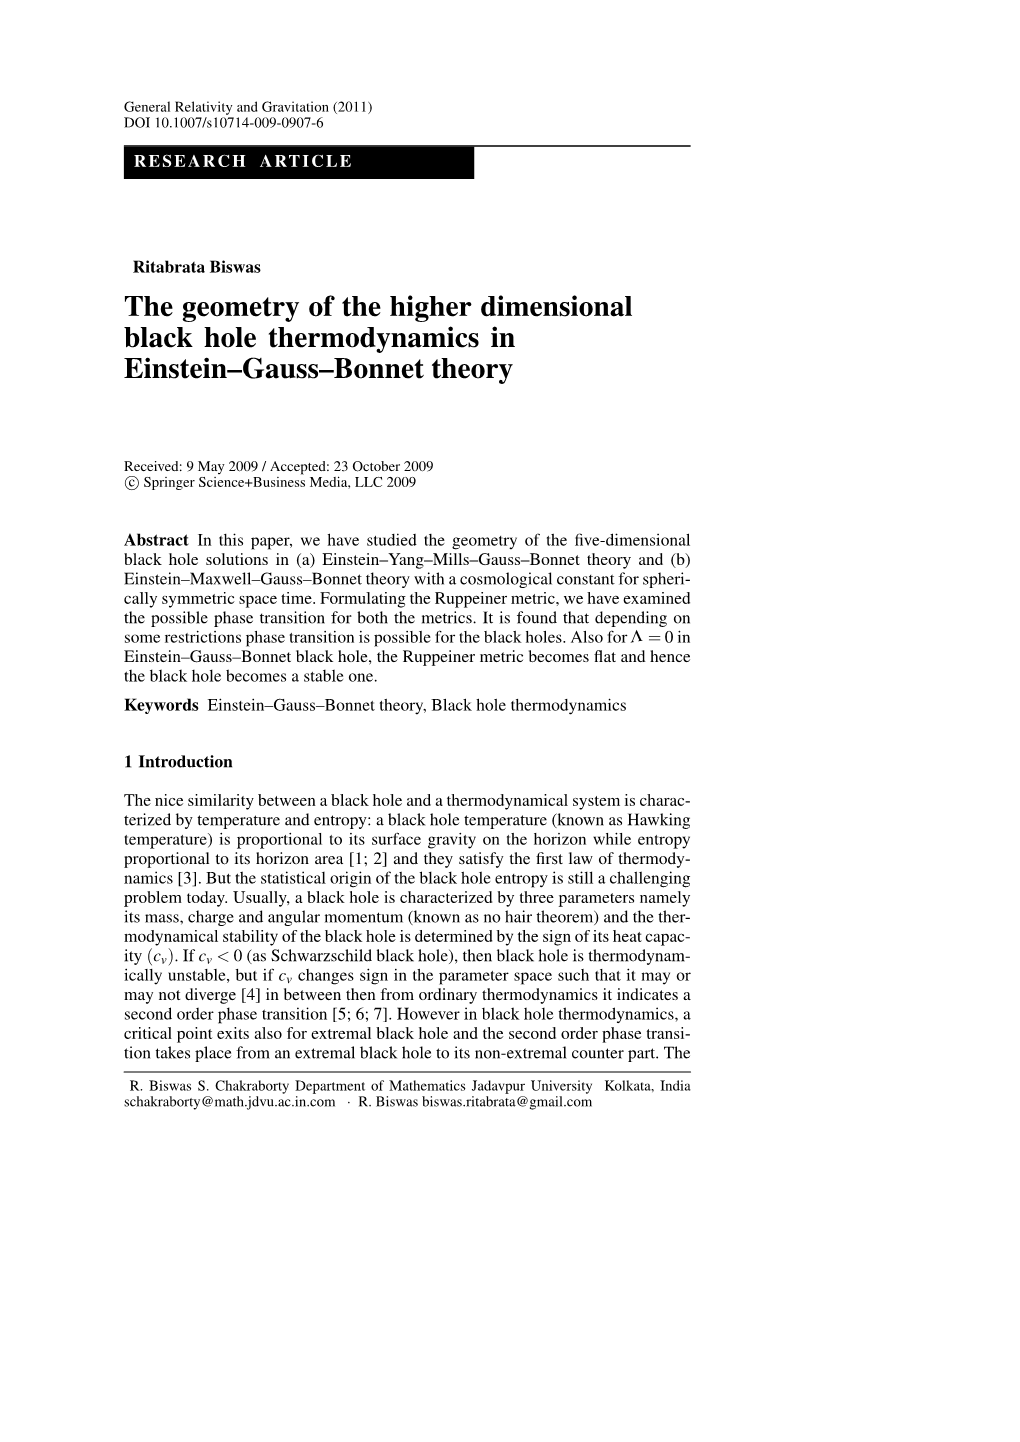 The Geometry of the Higher Dimensional Black Hole Thermodynamics in Einstein–Gauss–Bonnet Theory